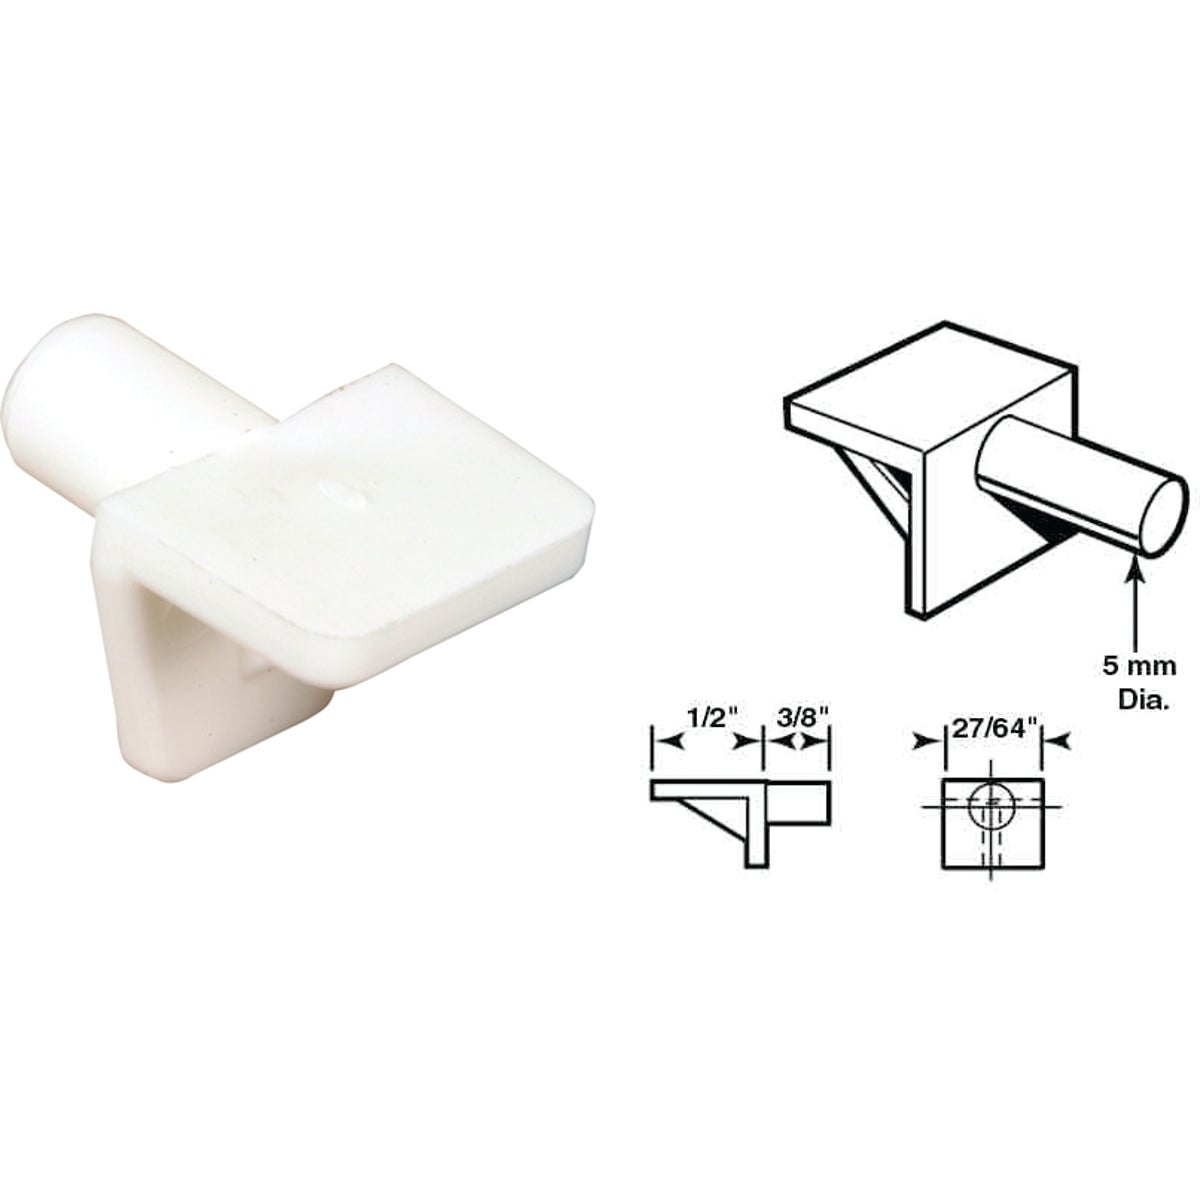 Item 259454, White plastic mini style shelf support pegs frequently used in stereo and 